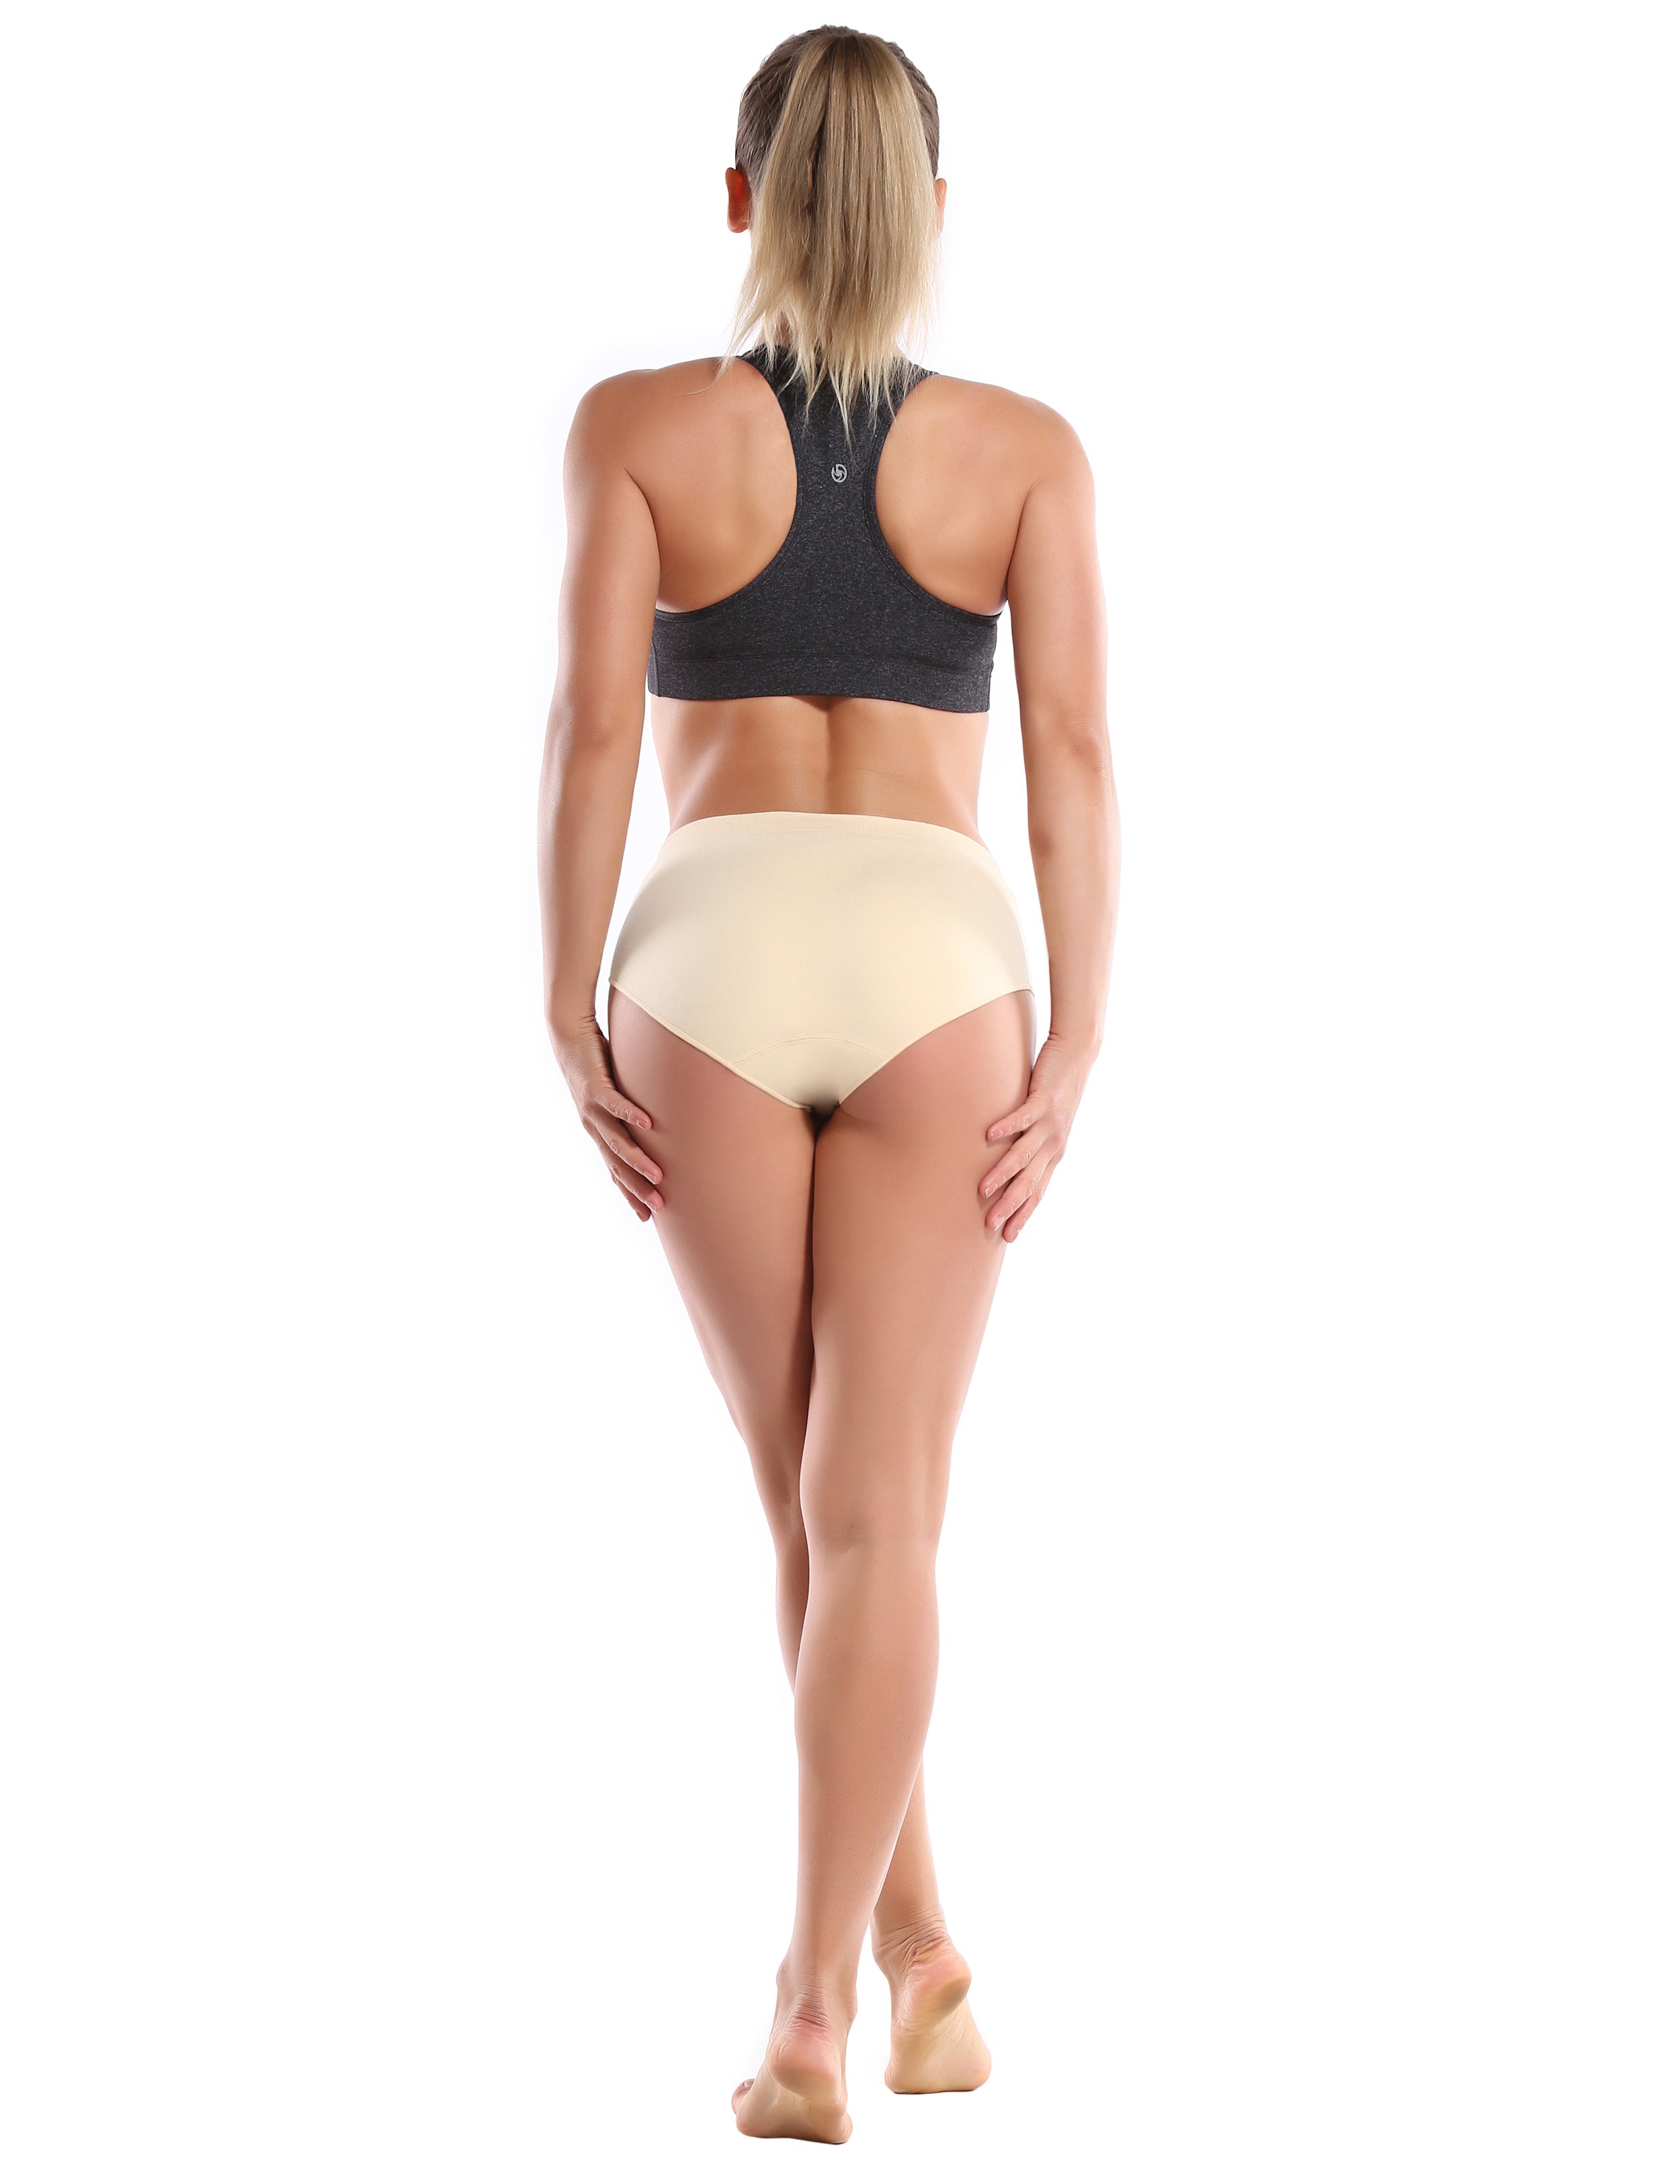 Seamless Sport Bikini Panties skin Sleek, smooth and streamlined: designed in our extra-soft knit material, this seamless thong embraces everyday comfort. Here with an allover heathered effect. Weave threads one by one High elasticity Softest-ever fabric Unsealed Comfortable No back coverage Machine wash.